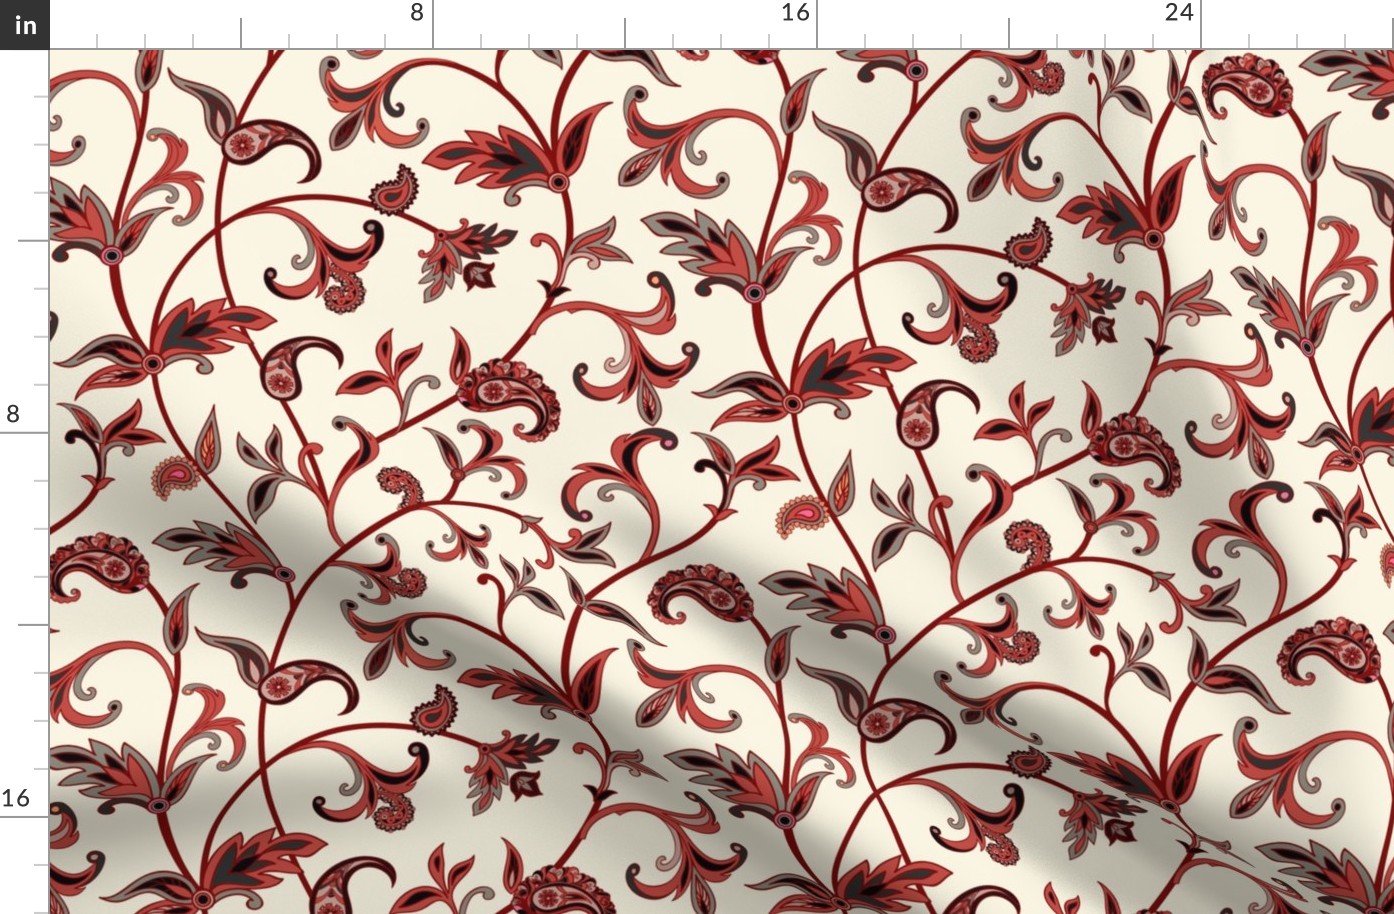 Indian Paisley Floral Vines in Red and Orange on Ivory